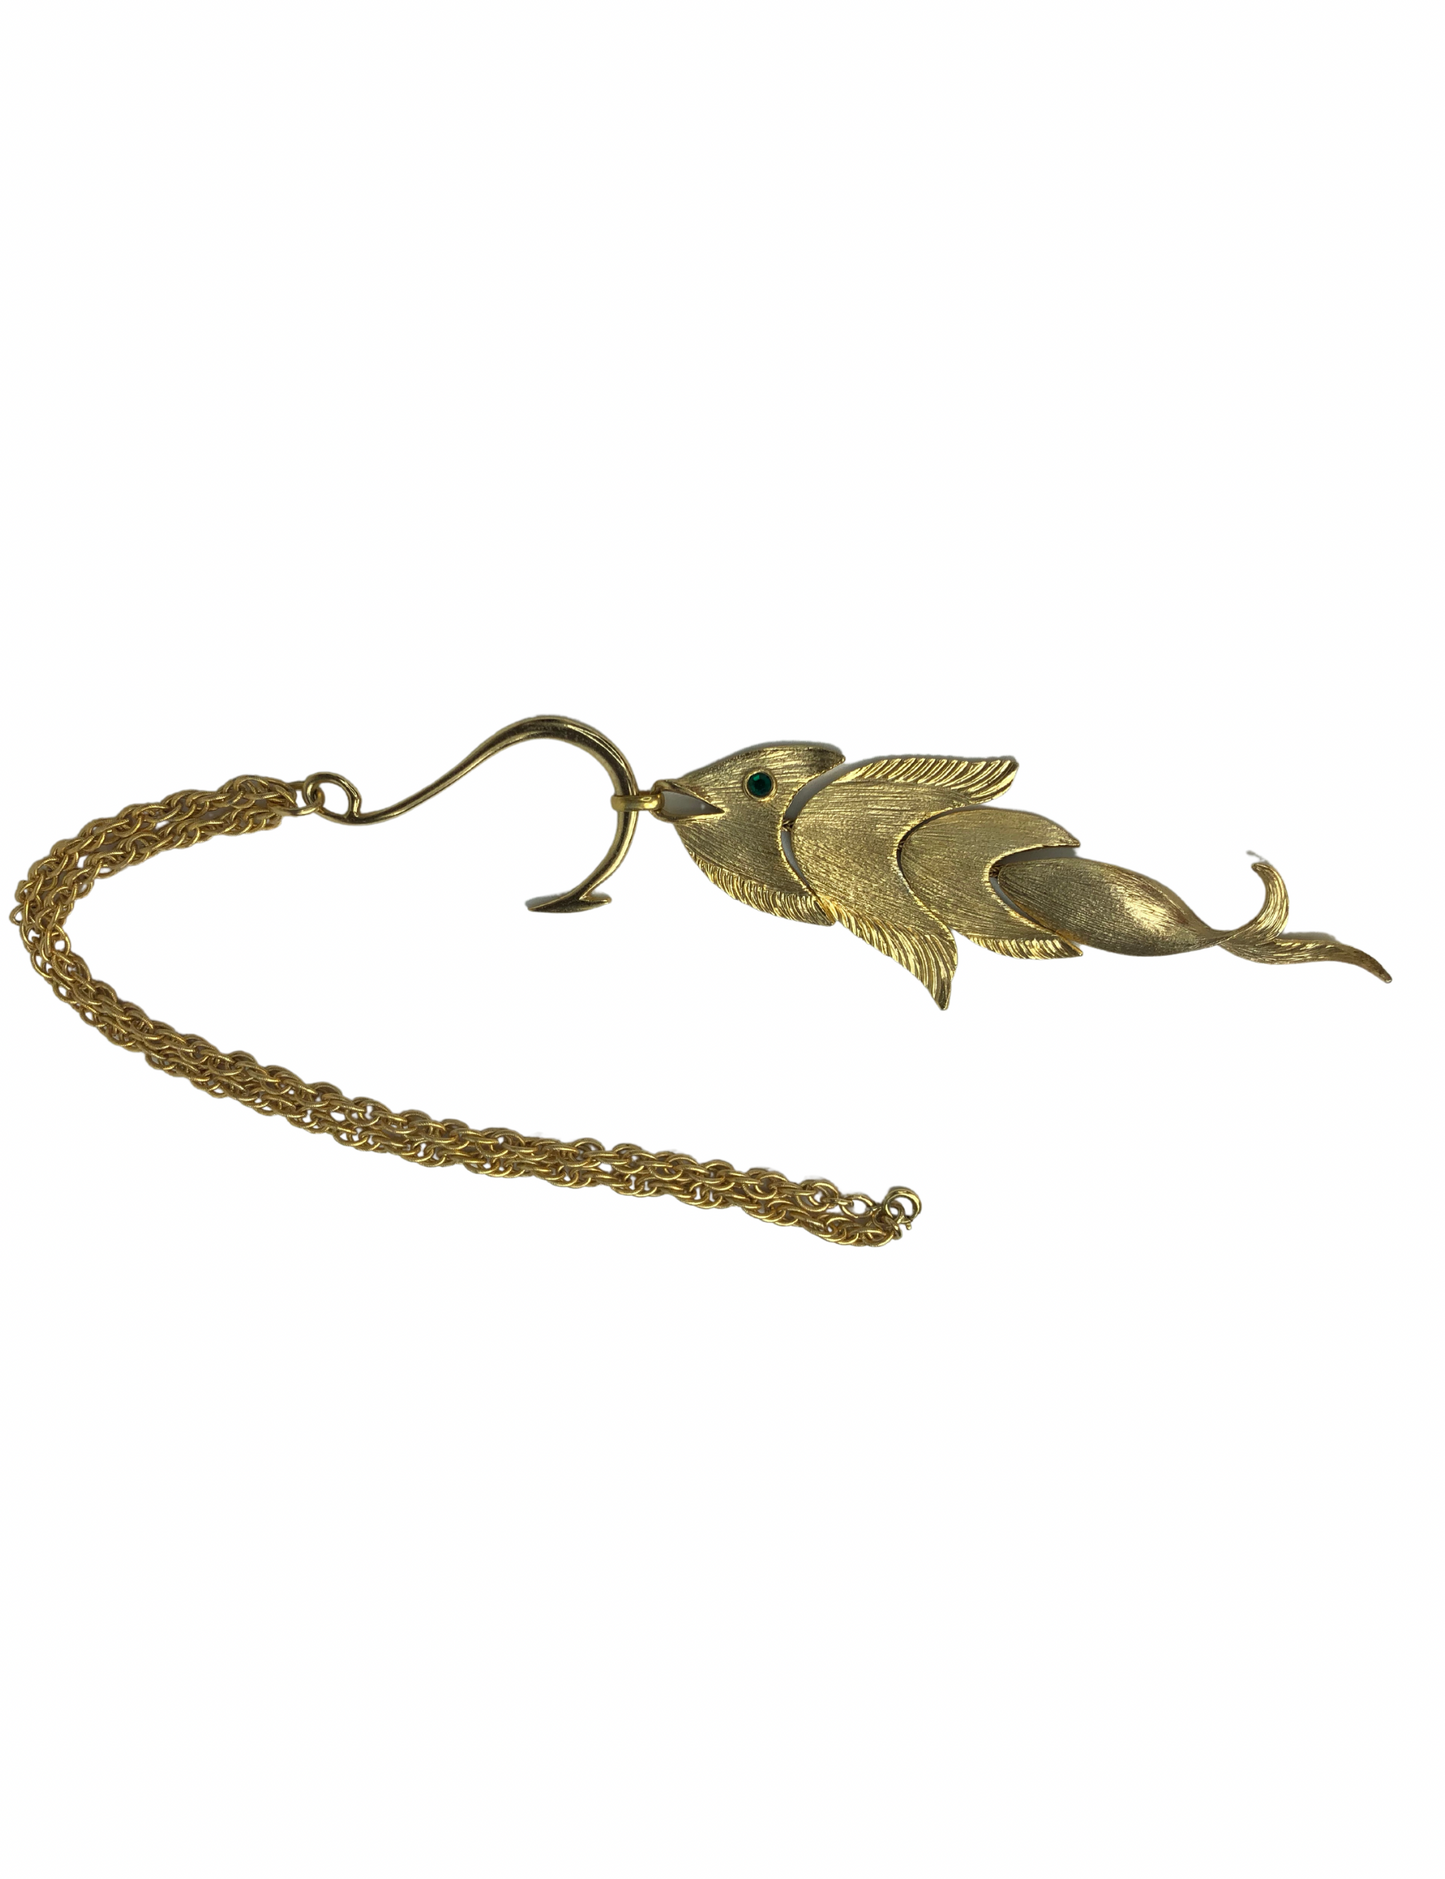 70’s Gold NAPIER Articulated Fish Pisces Pendant Chain Necklace